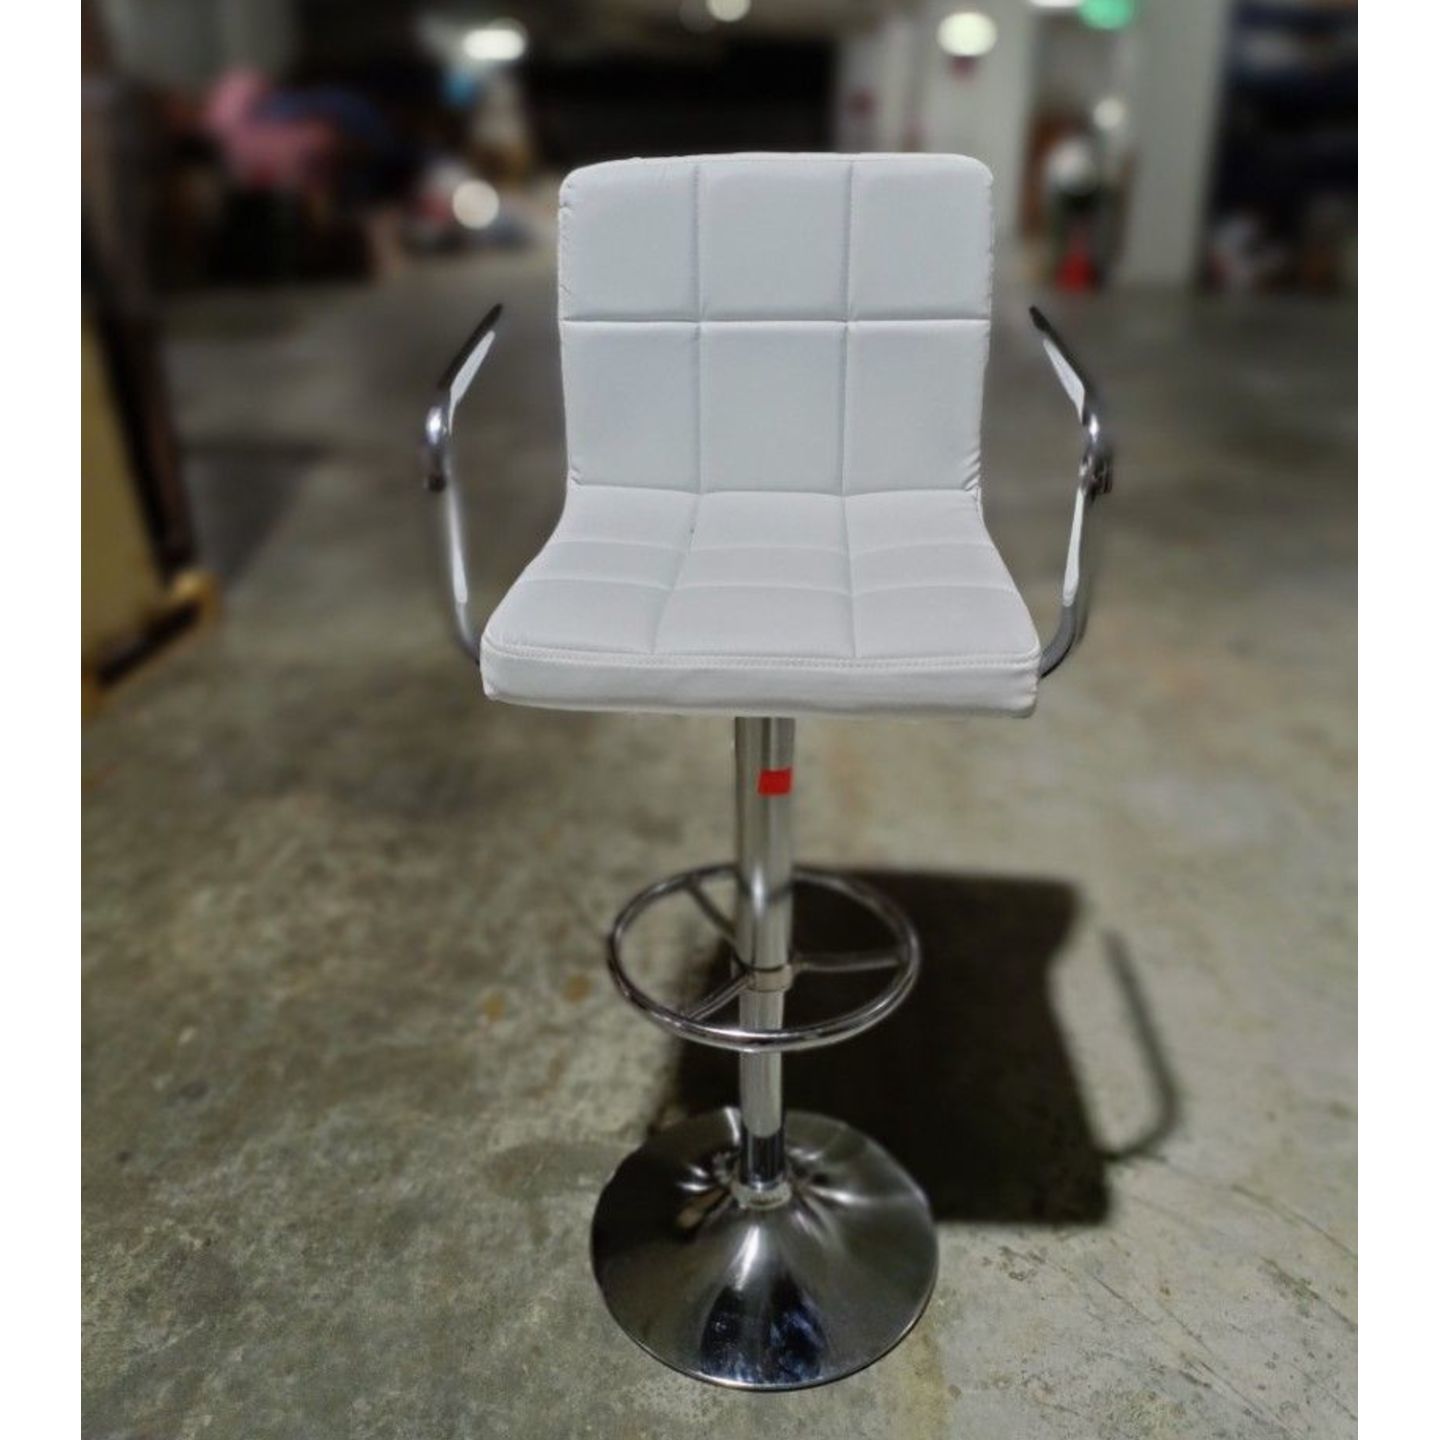 VADO Bar Stool with Armrest in WHITE